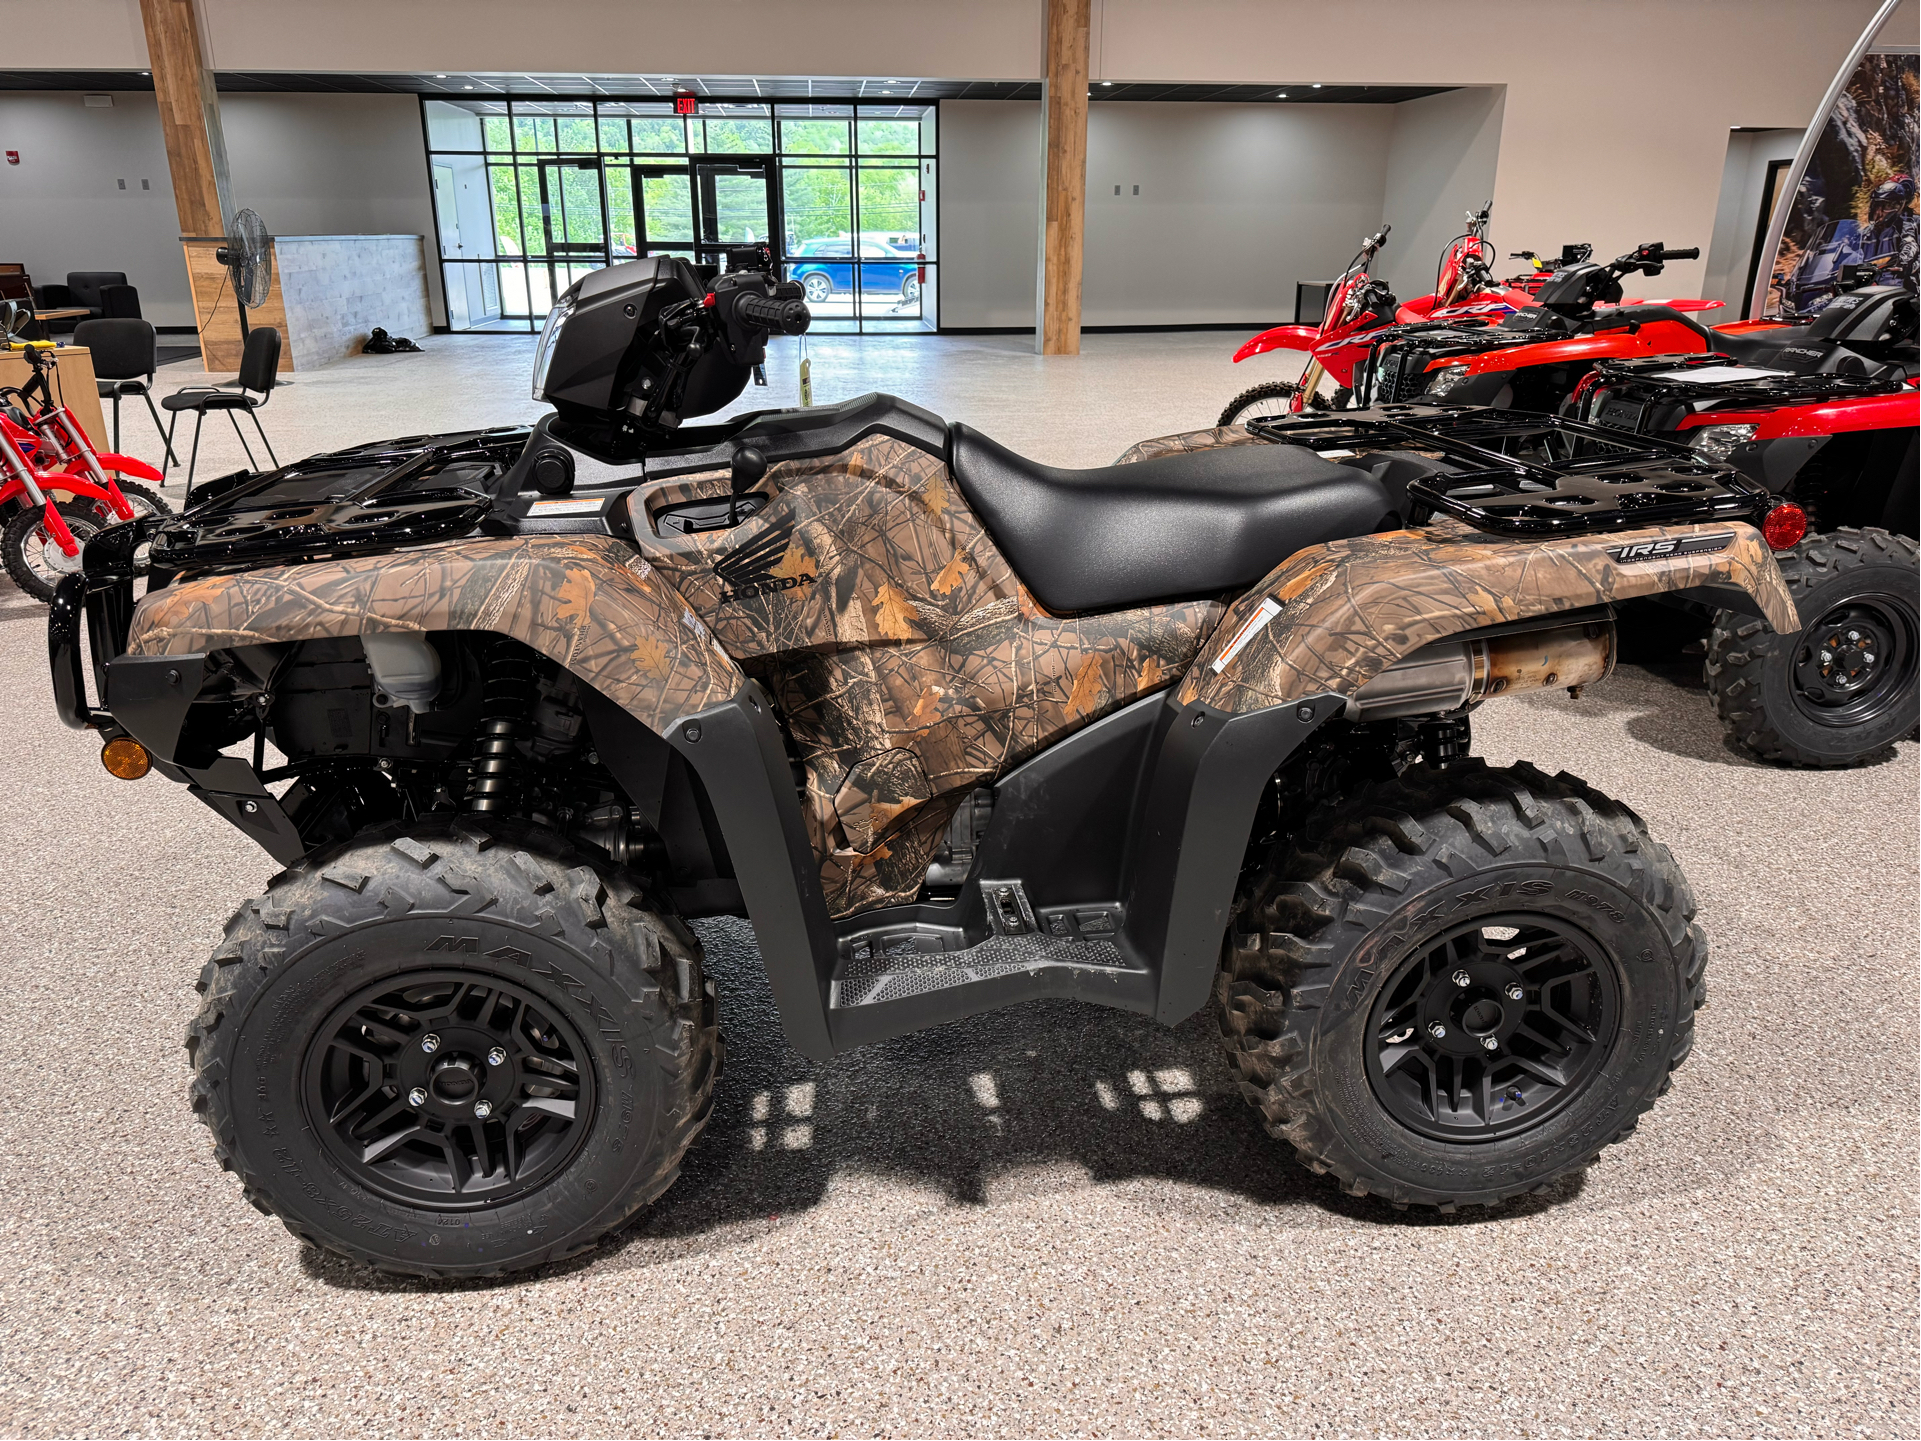 2024 Honda FourTrax Foreman Rubicon 4x4 Automatic DCT EPS Deluxe in Gorham, New Hampshire - Photo 2